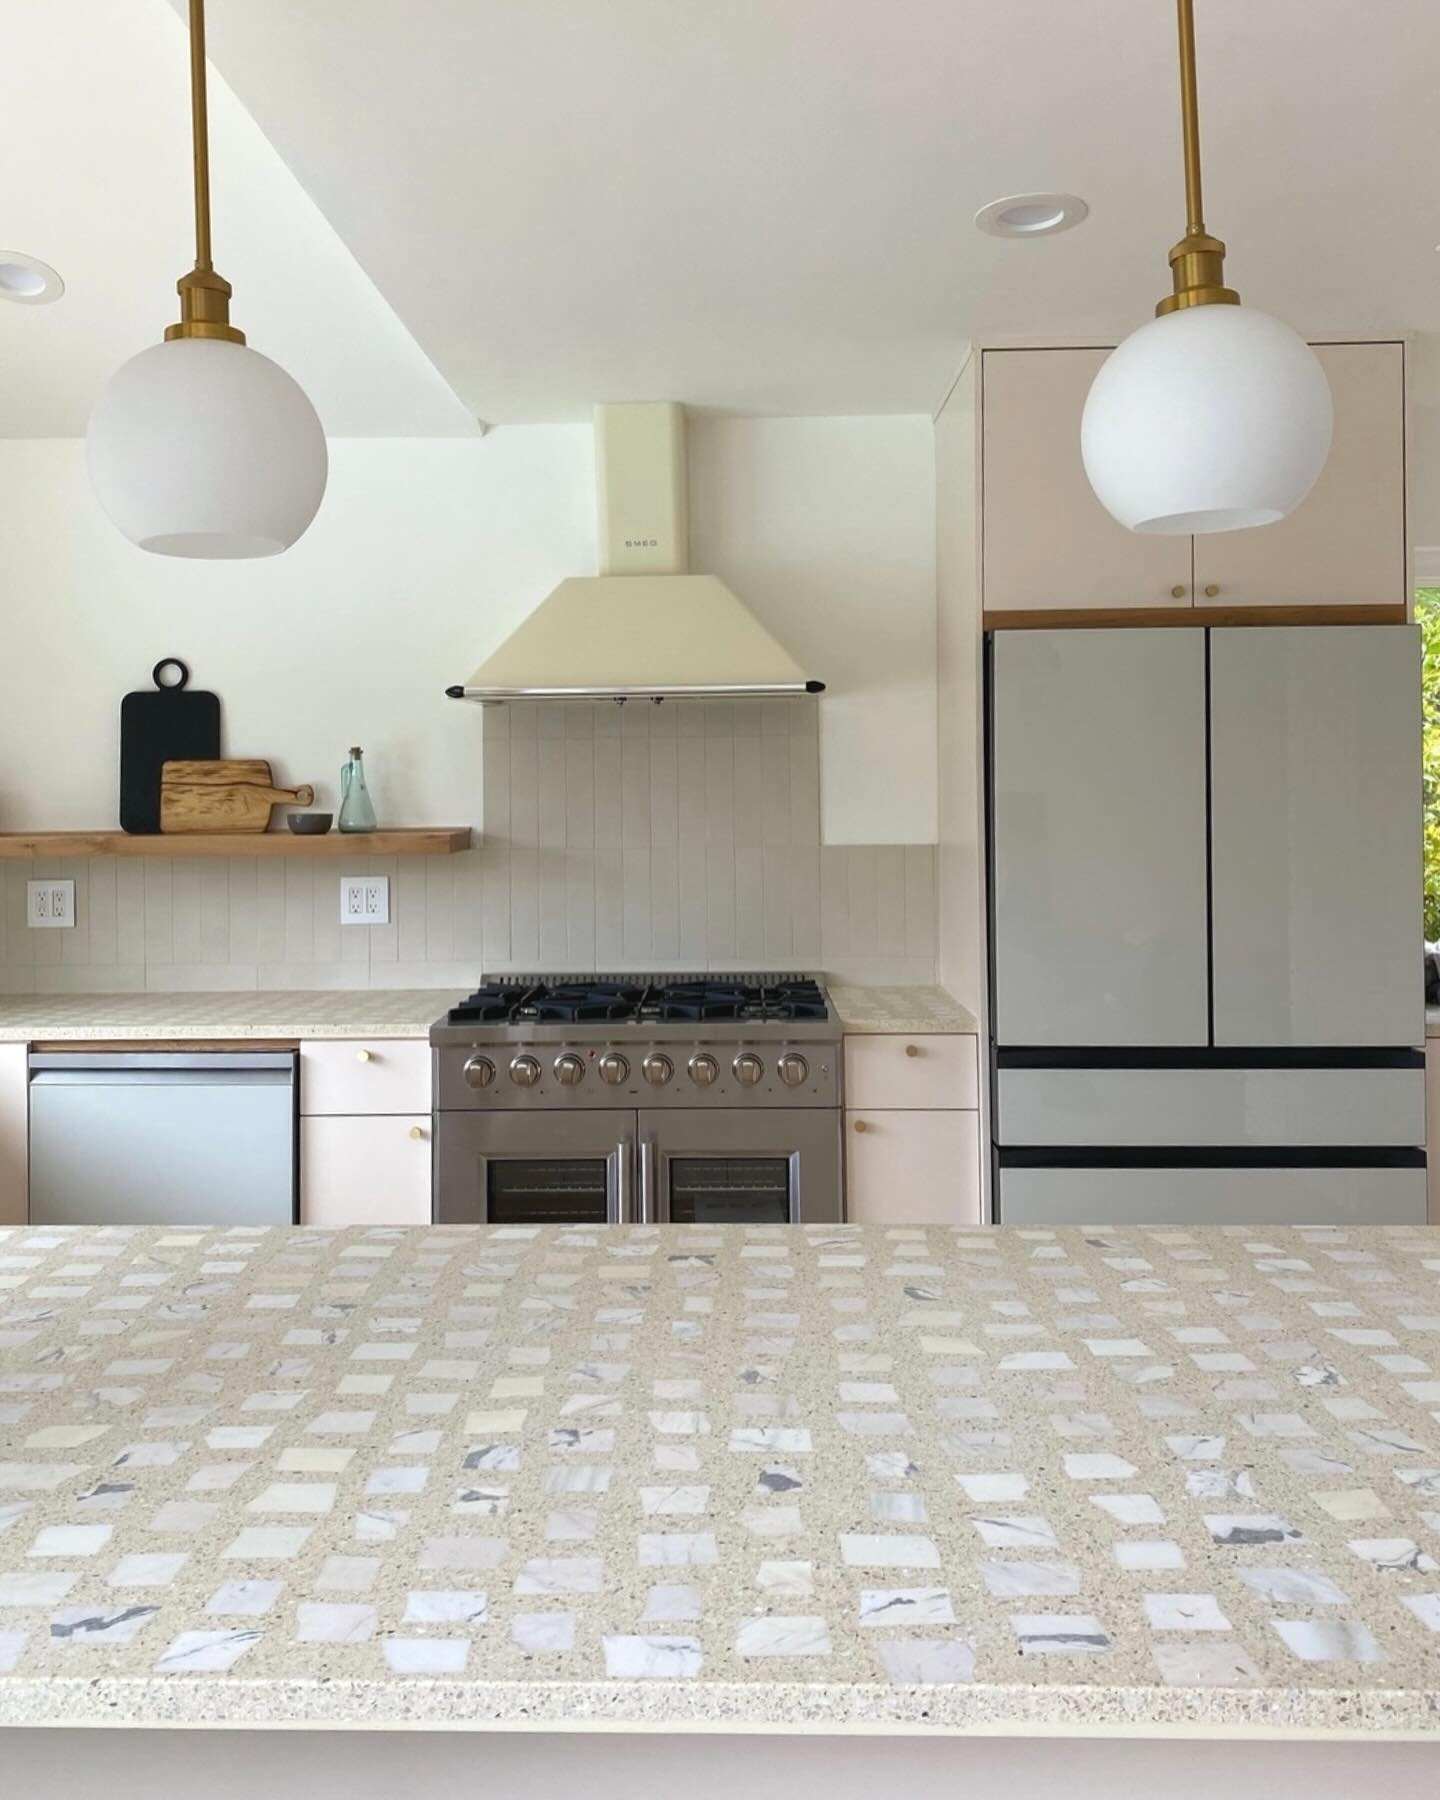 simply obsessed with scarpa 🐚 //
⠀⠀⠀⠀⠀⠀⠀⠀⠀
〰️ inspired by palladiana style terrazzo, our scarpa terrazzo features hand placed XL aggregate stones 🫳 
〰️ pacifica (slab) blonde scarpa XL yellow shown here in this stunning kitchen 👏
⠀⠀⠀⠀⠀⠀⠀⠀⠀
@renouv